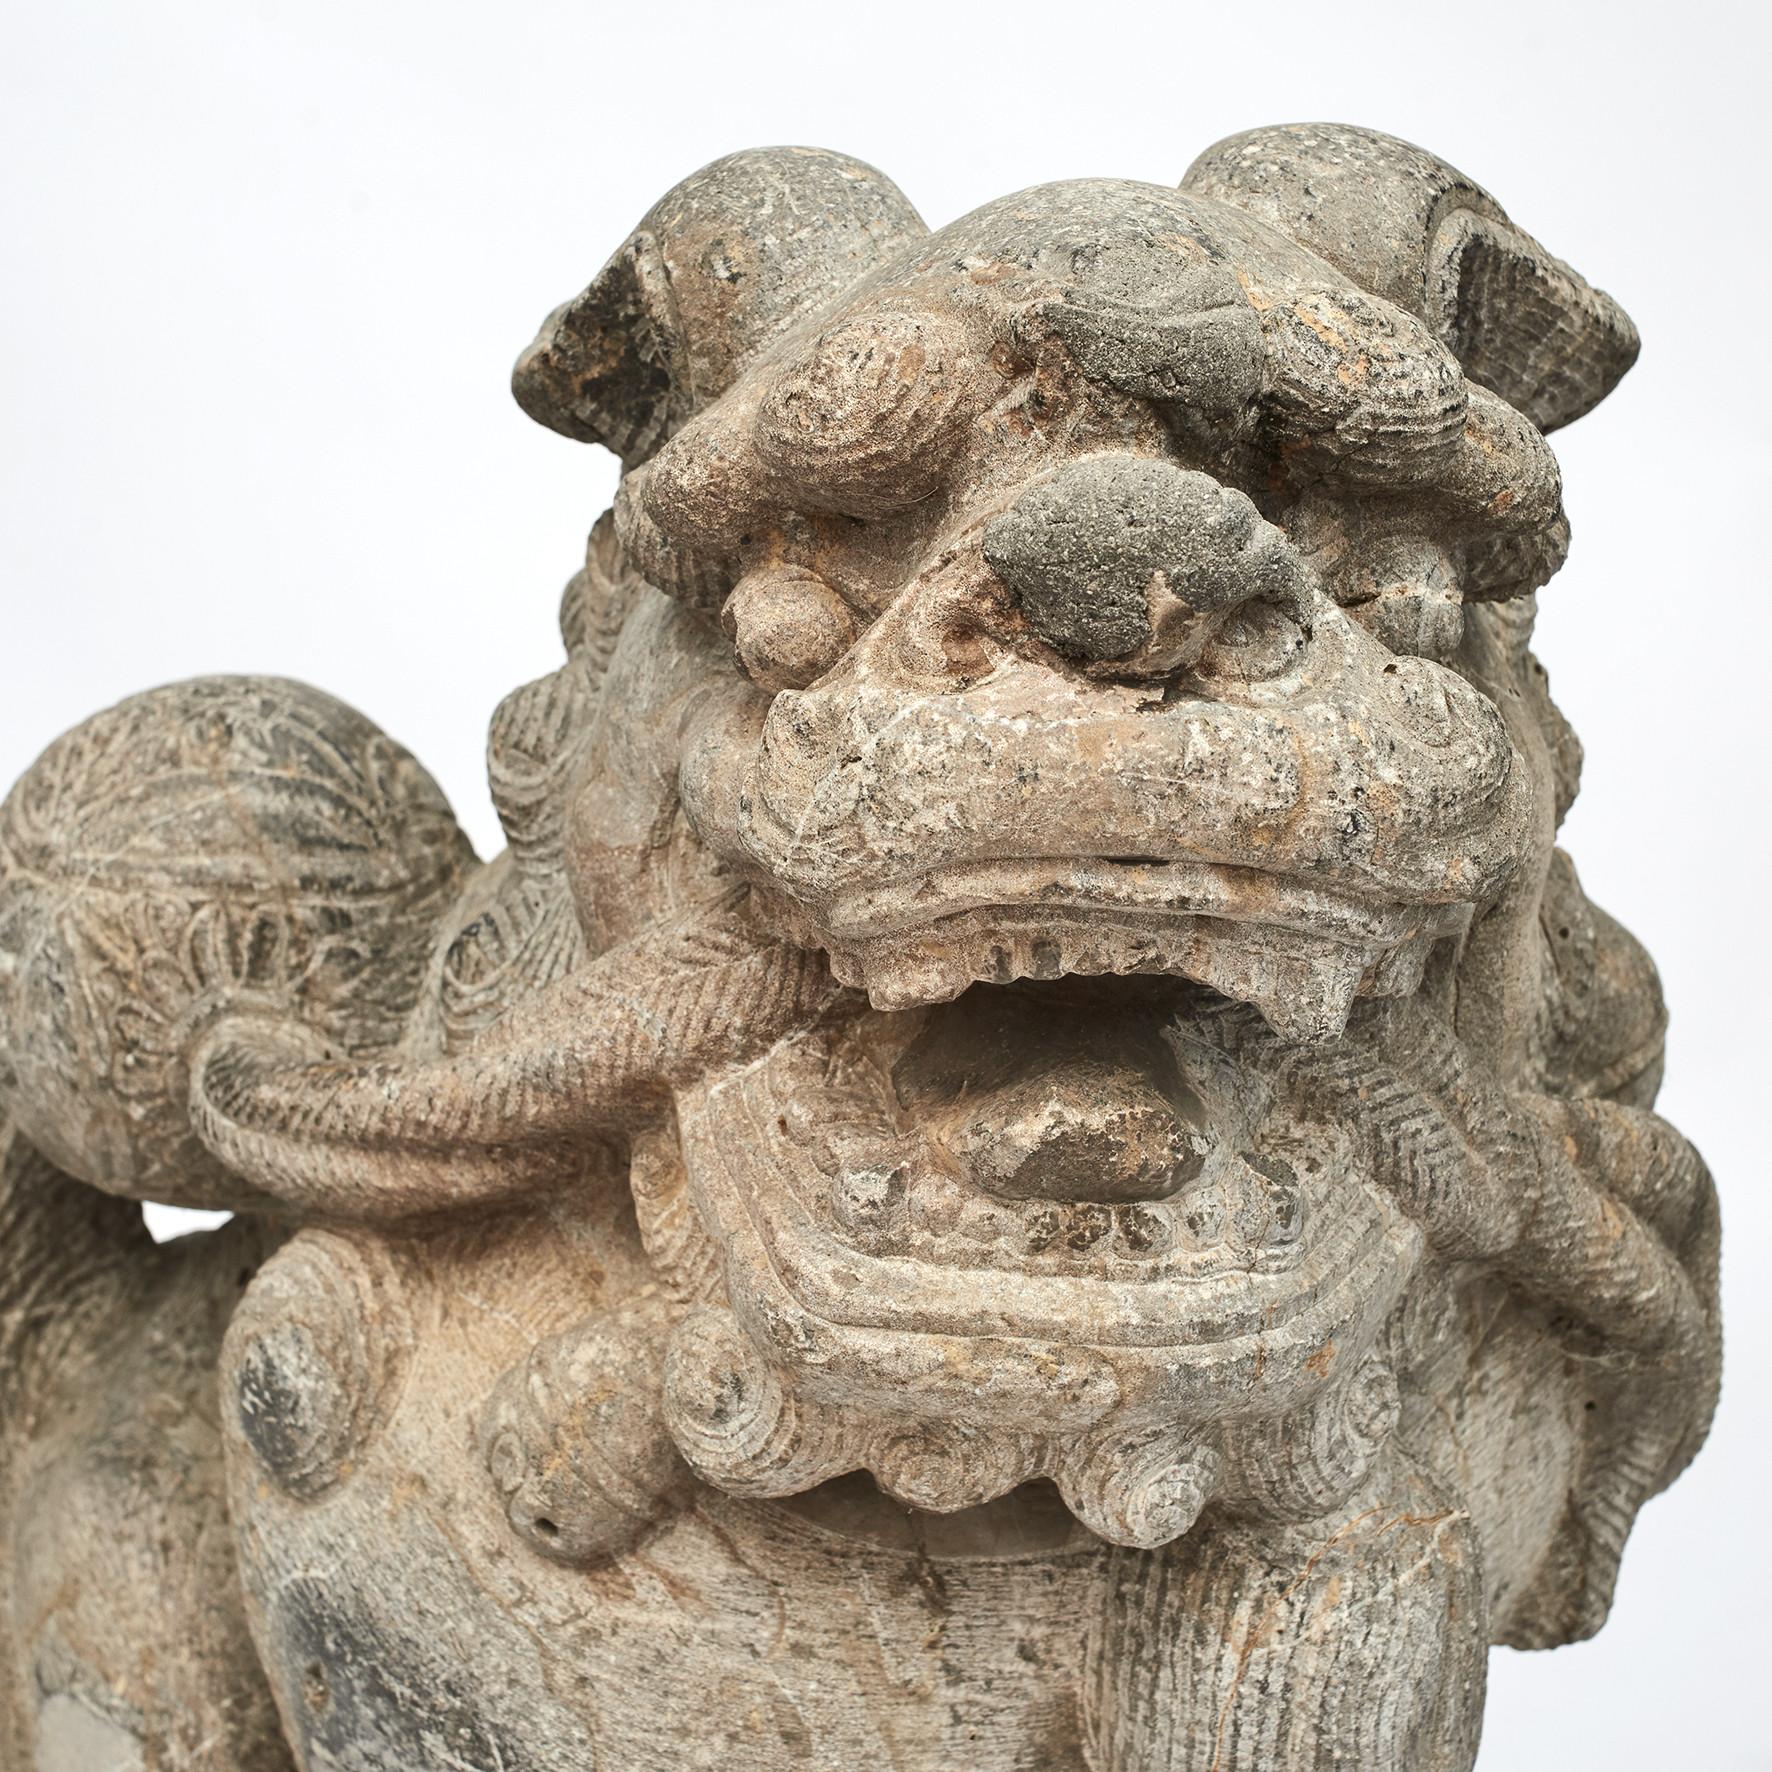 Rare pair of large Chinese carved stone foo dog guardian lions. Originated from a house of a mandarin (a public official in the Chinese Empire), located on The Silk Road.
Here they were placed in front of the gate, with the gate doors mounted on